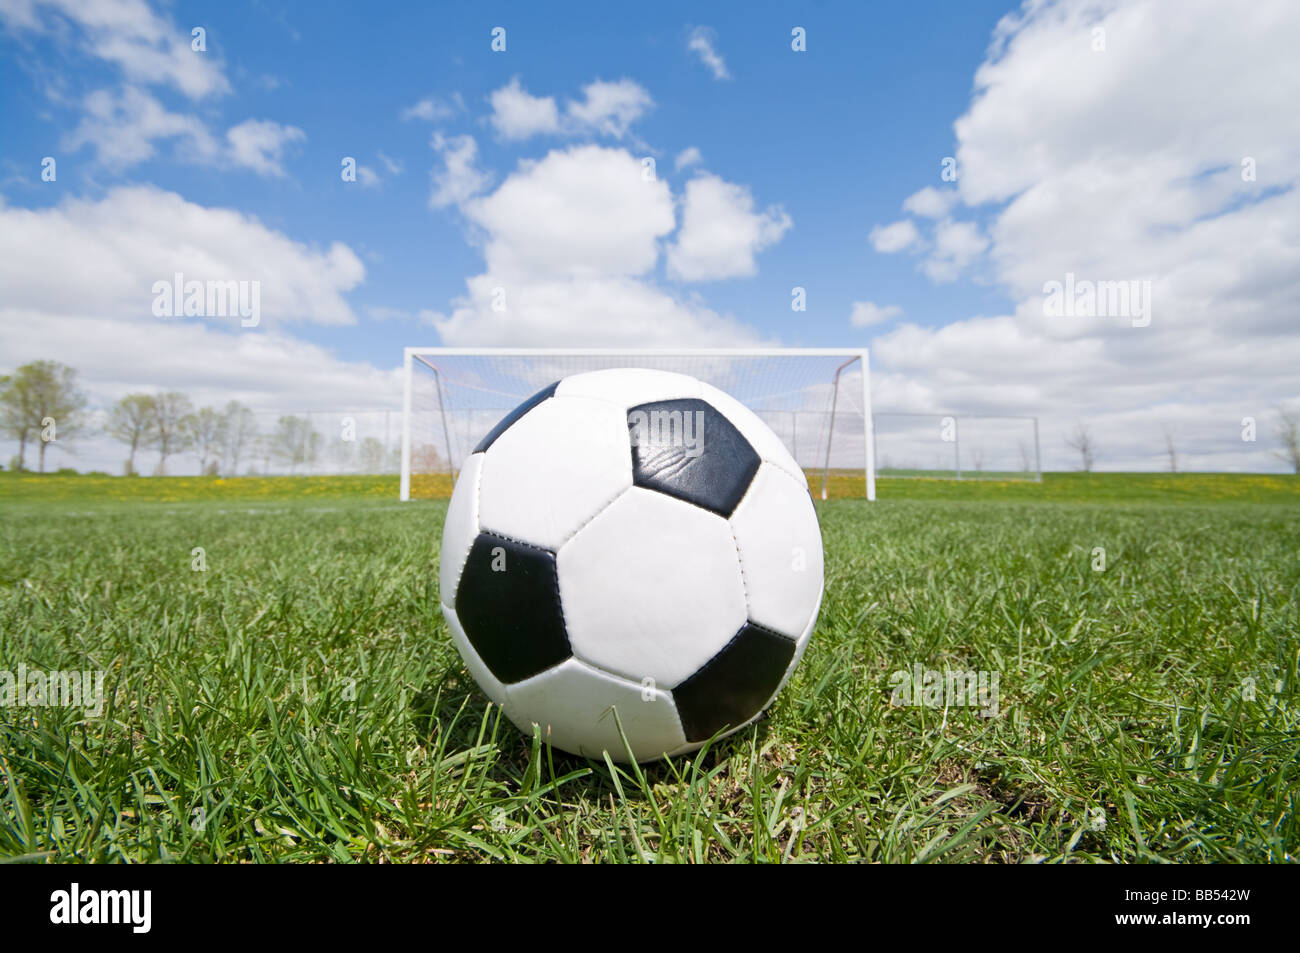 Soccer Ball On The Pitch Field With Goal In Background Stock Photo Alamy